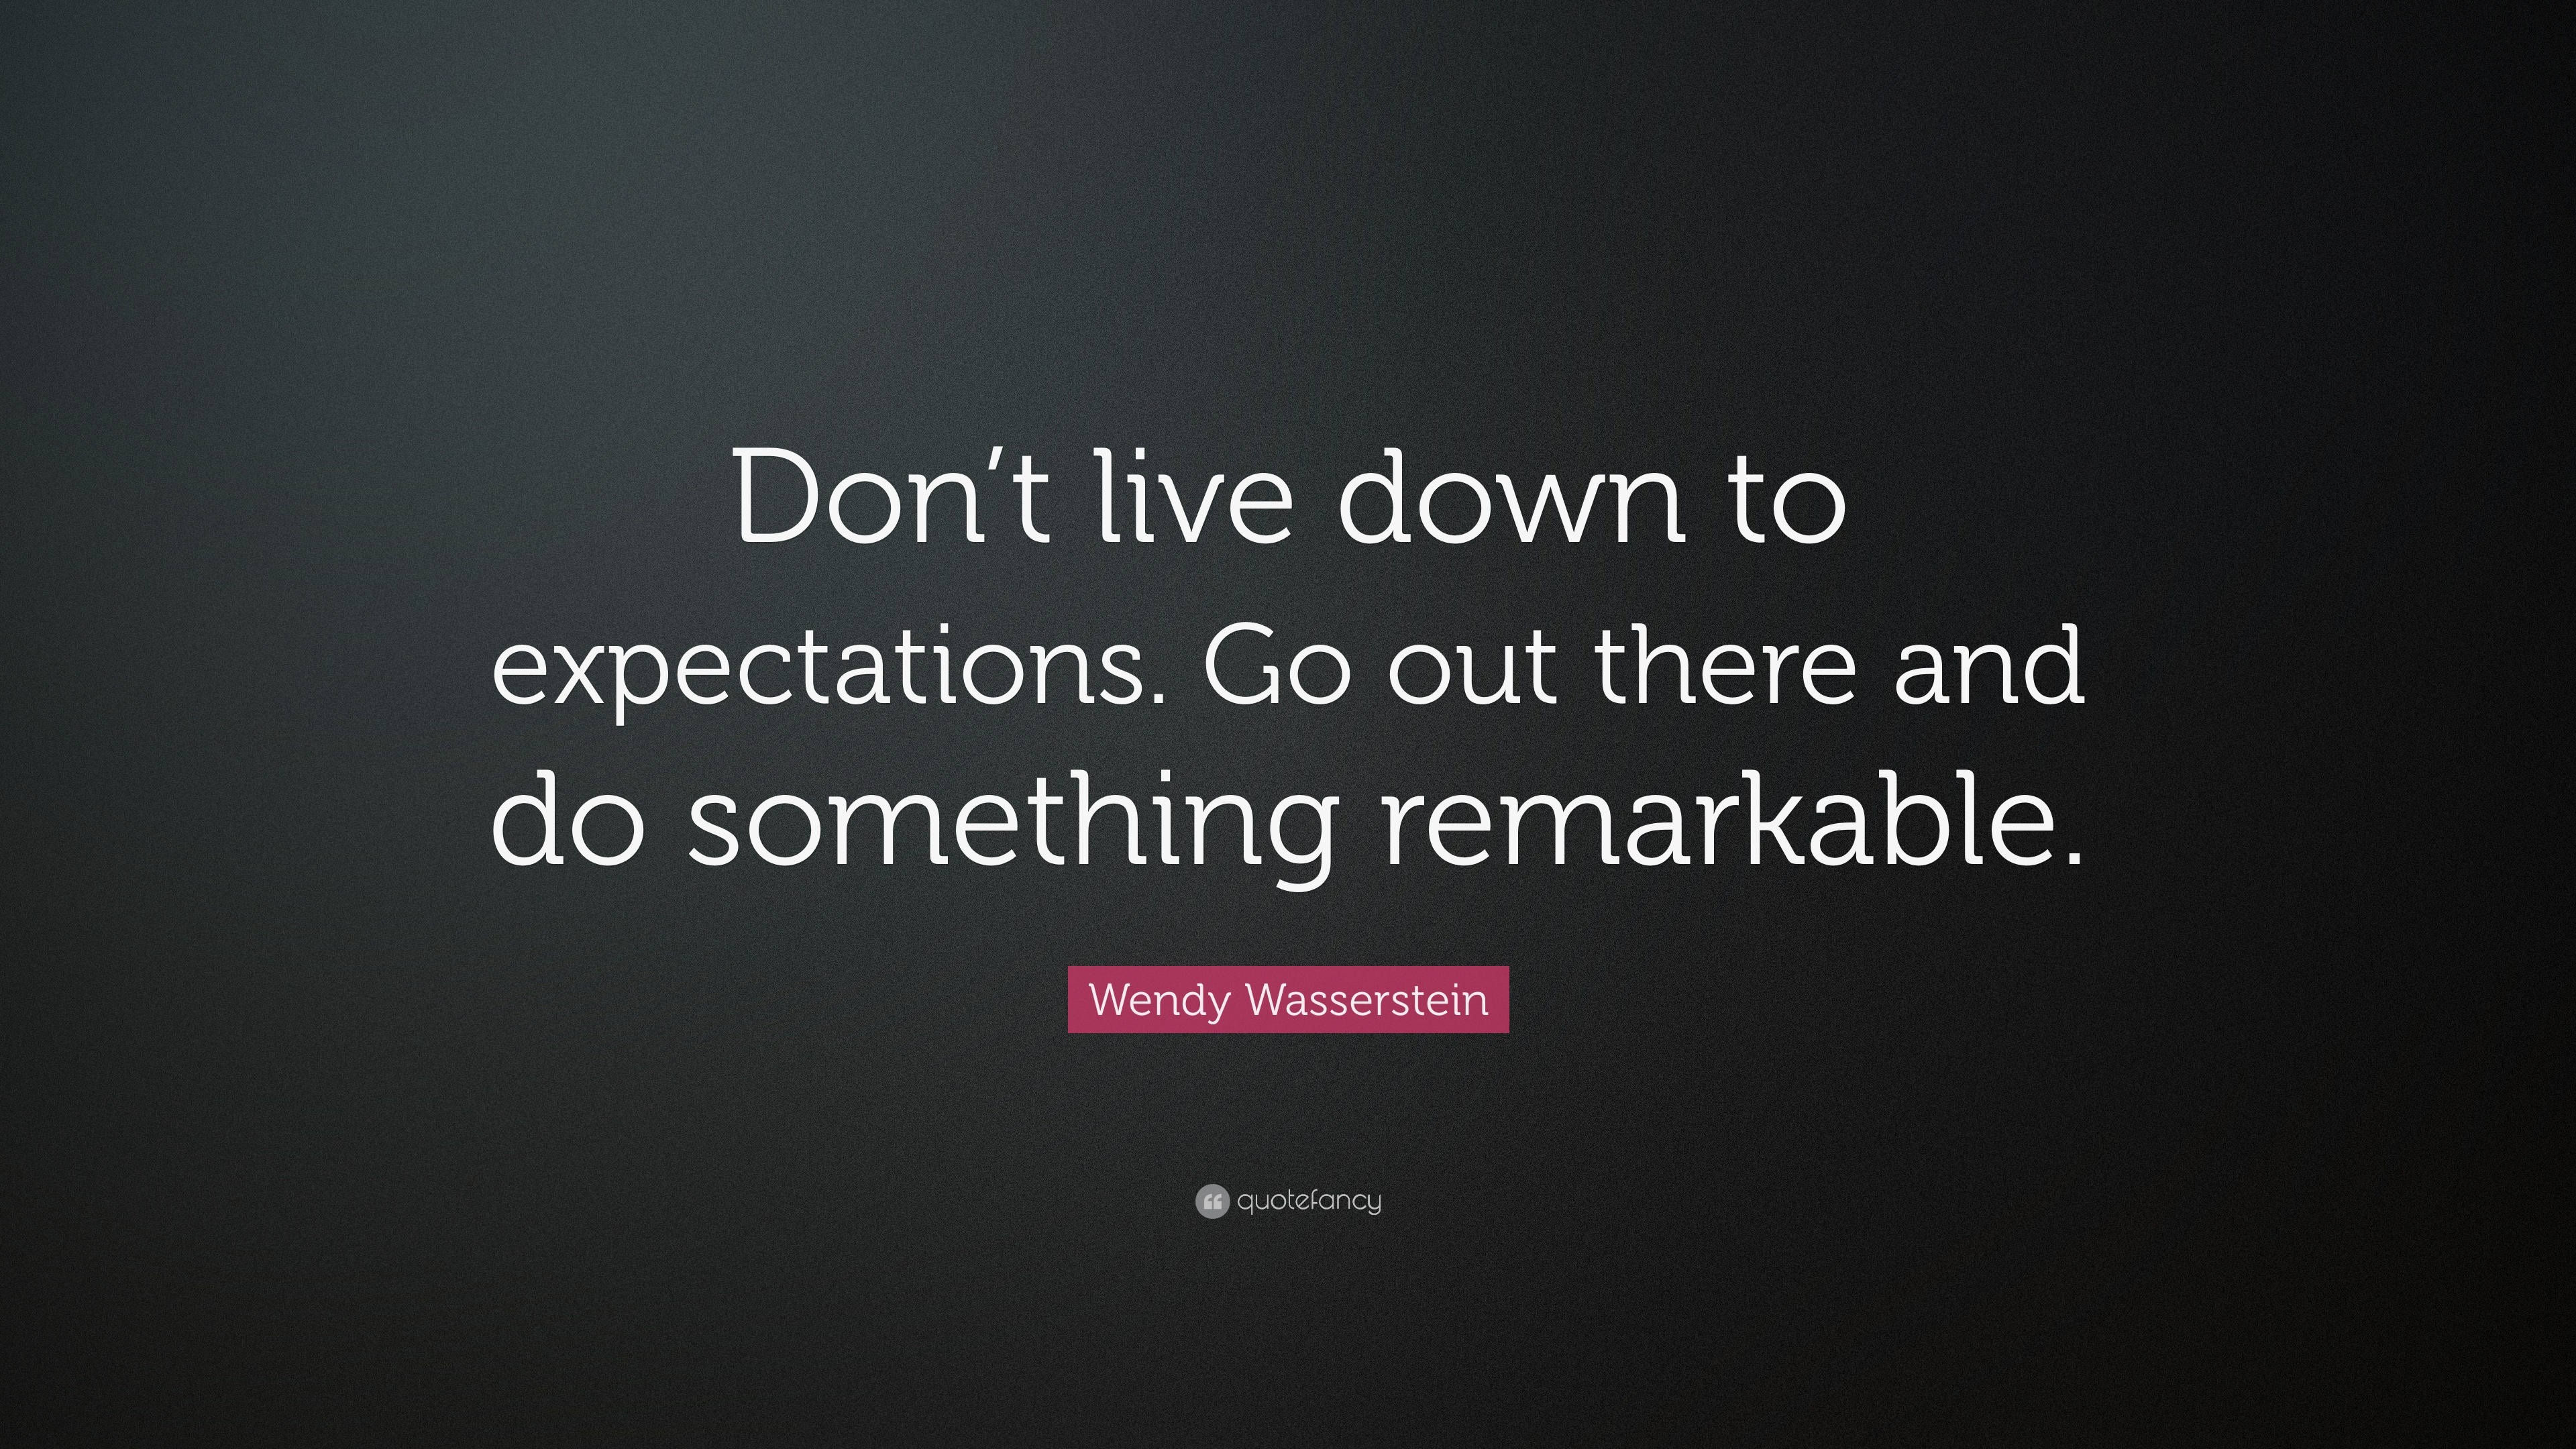 Wendy Wasserstein Quote: “Don’t live down to expectations. Go out there ...